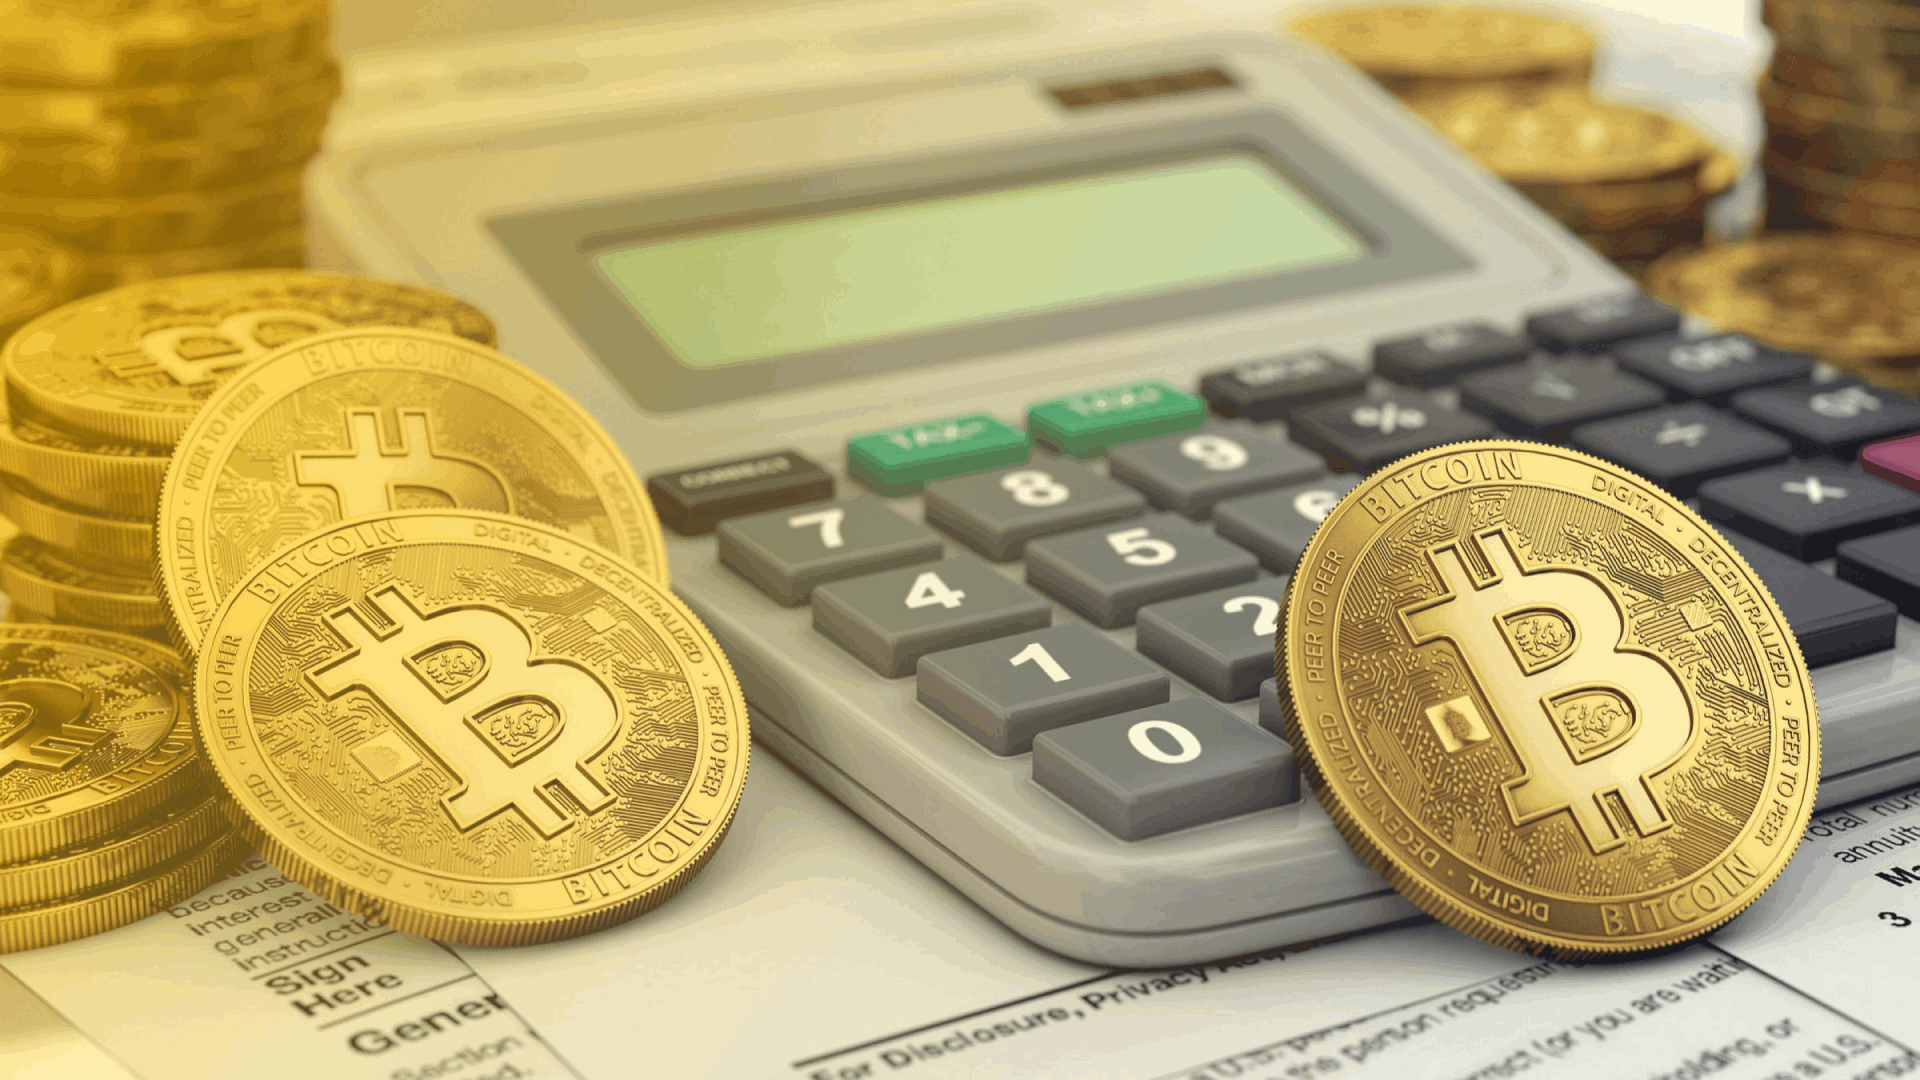 Tax treatment of cryptocurrencies